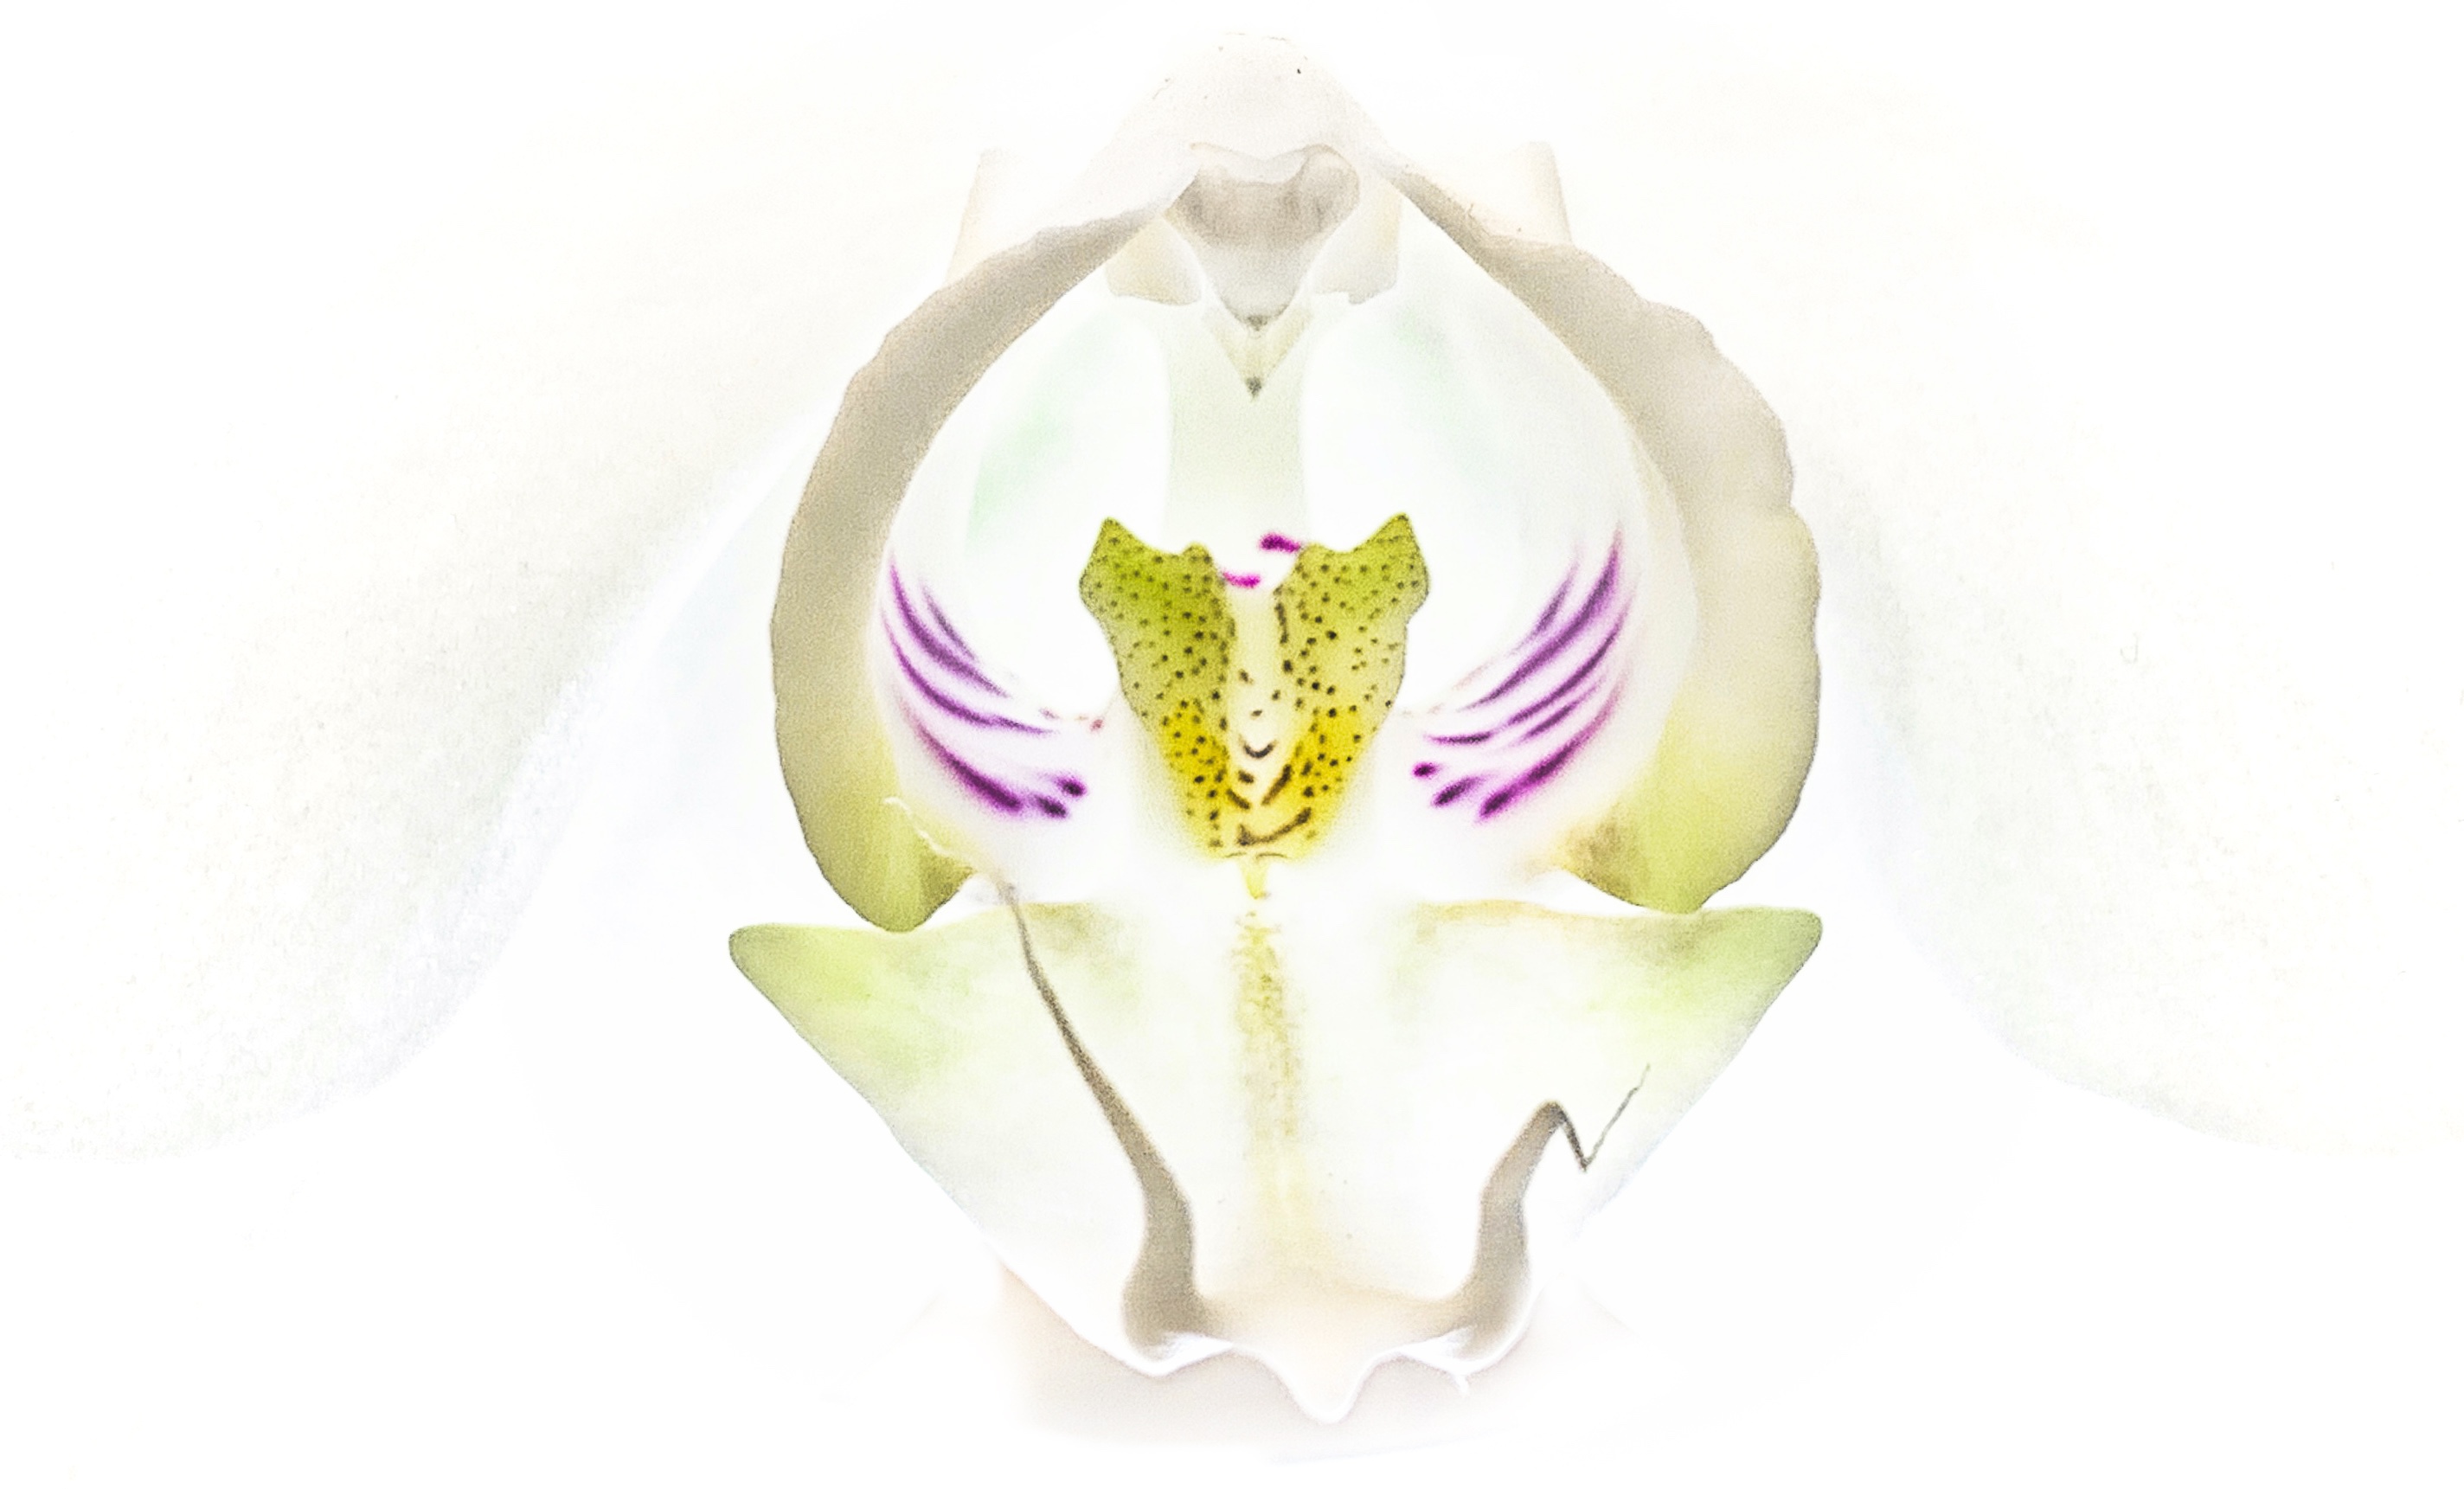 Day 7.3 – Orchid